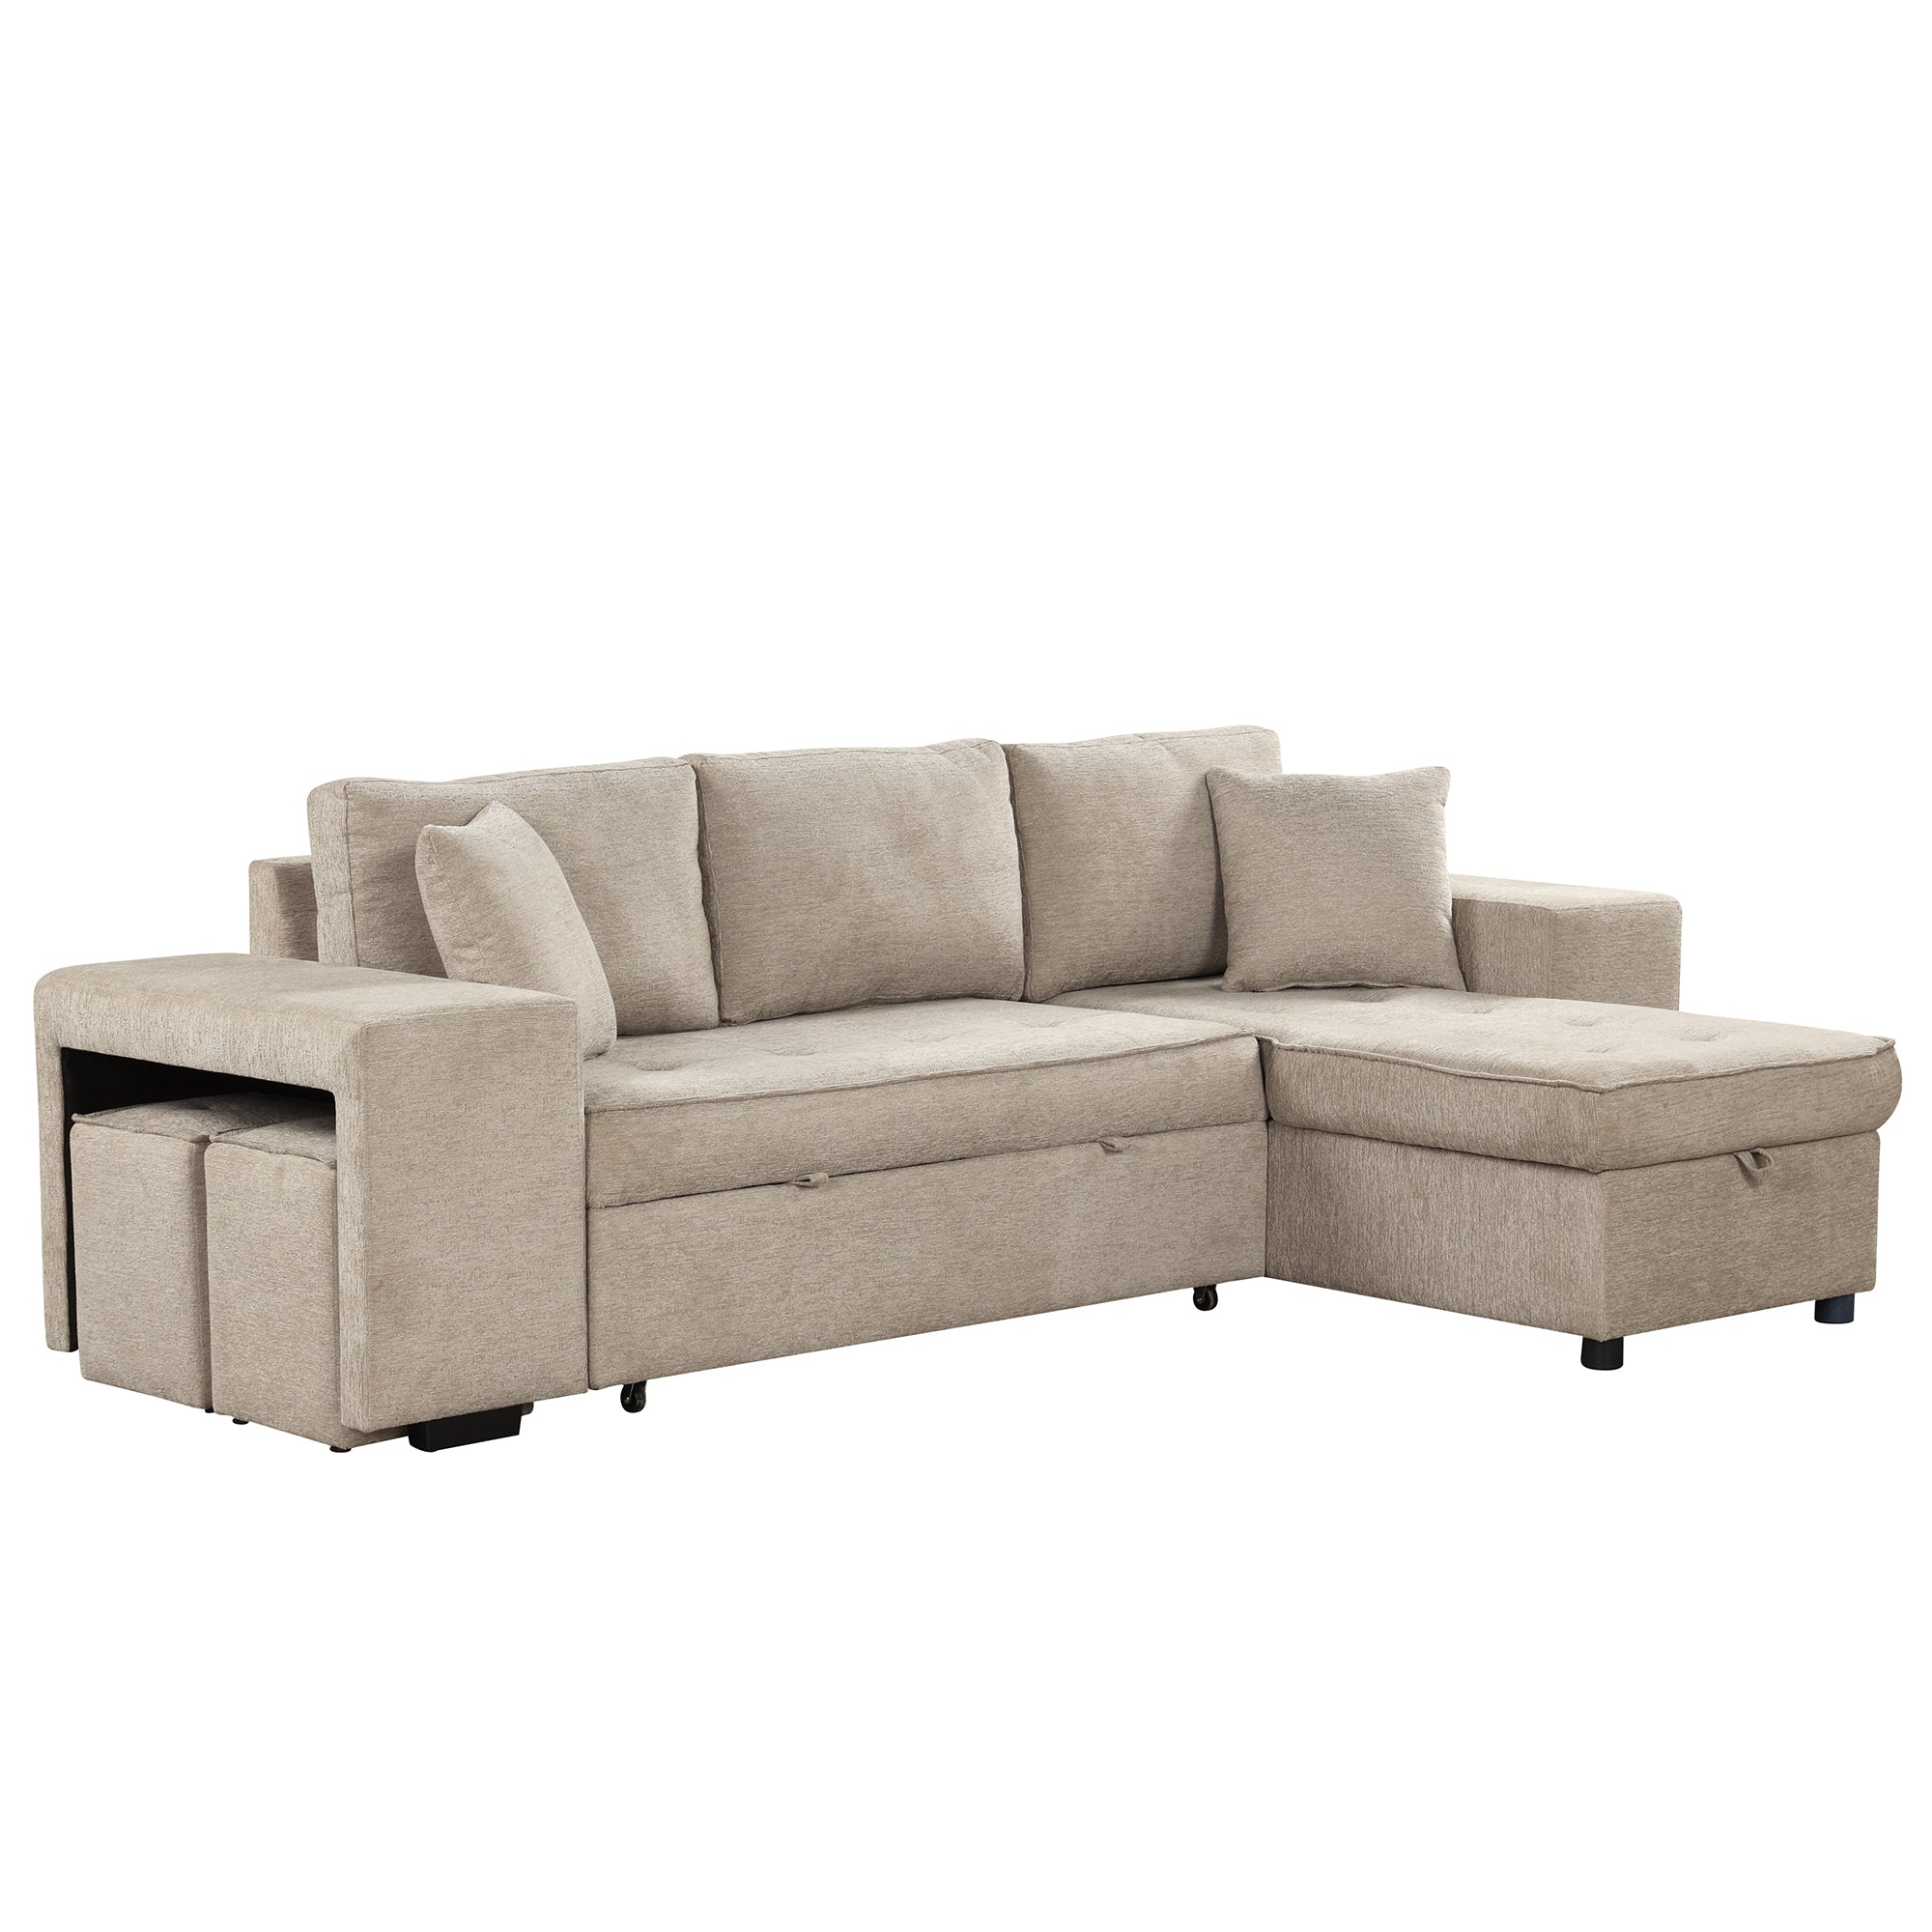 104" Brown Modern L-Shaped Sectional Sofa Bed with Storage